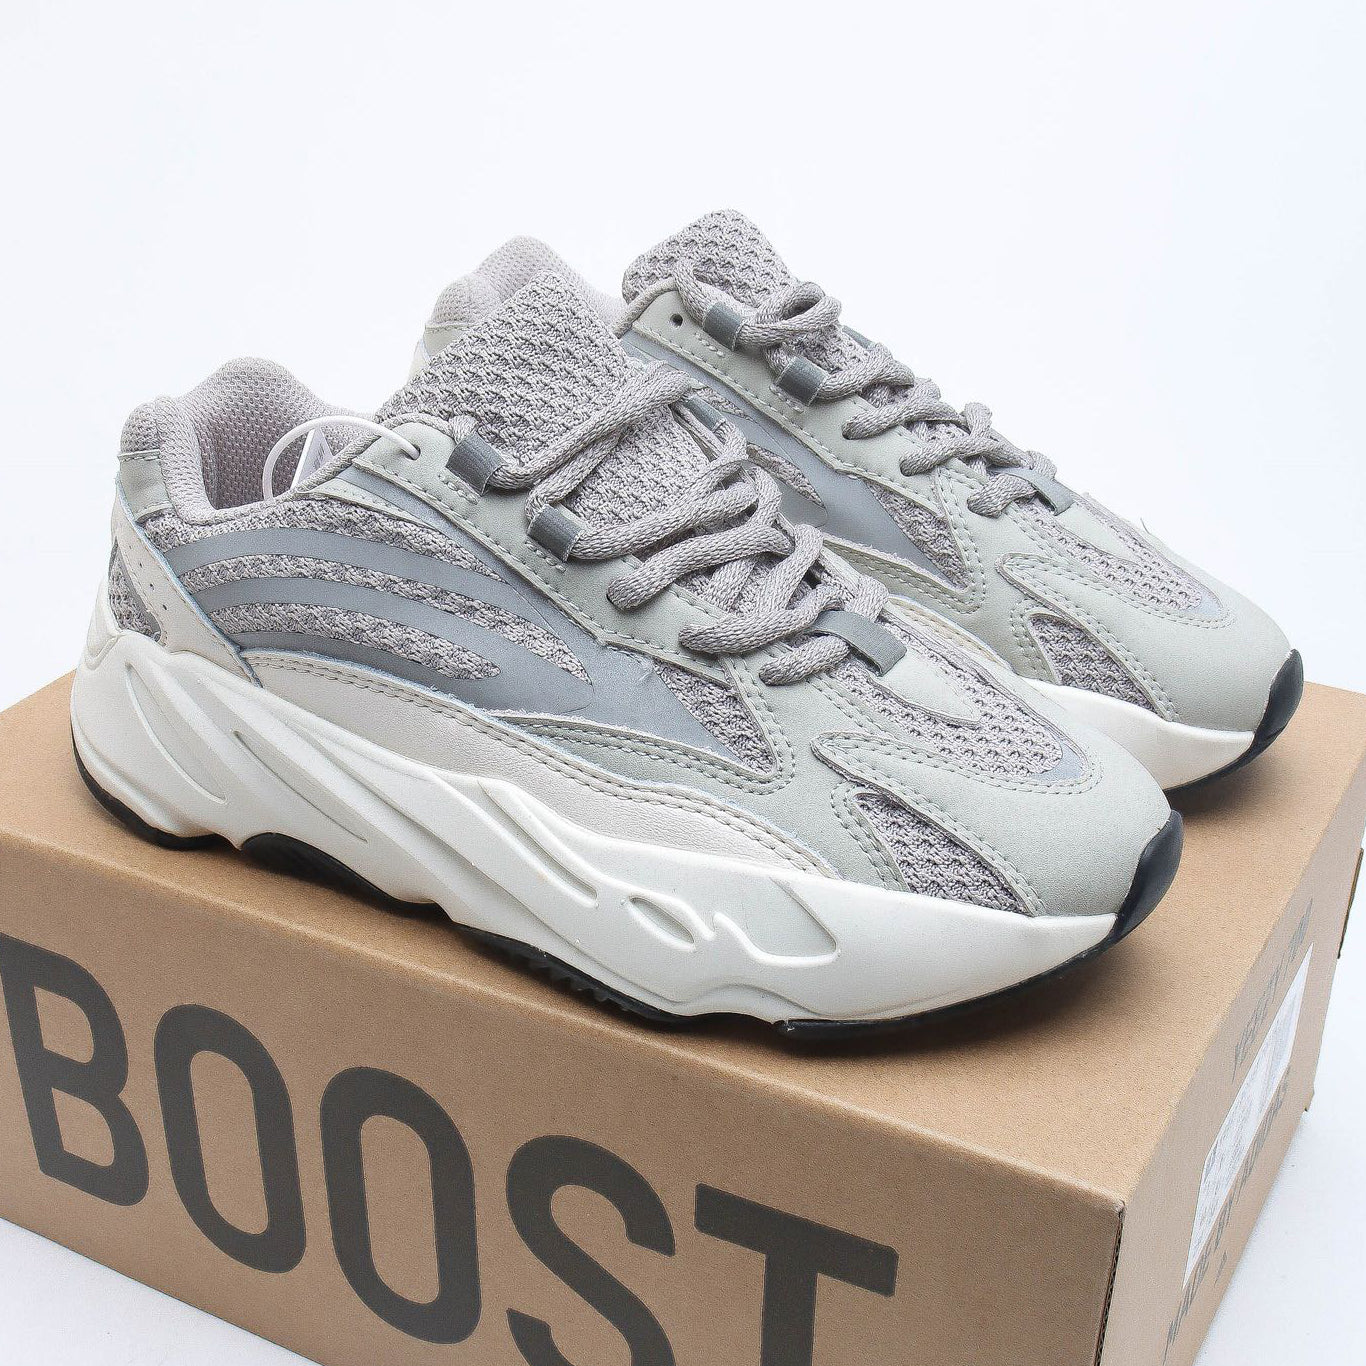 Adidas Yeezy Boost 700 V2 Static Sneakers Shoes